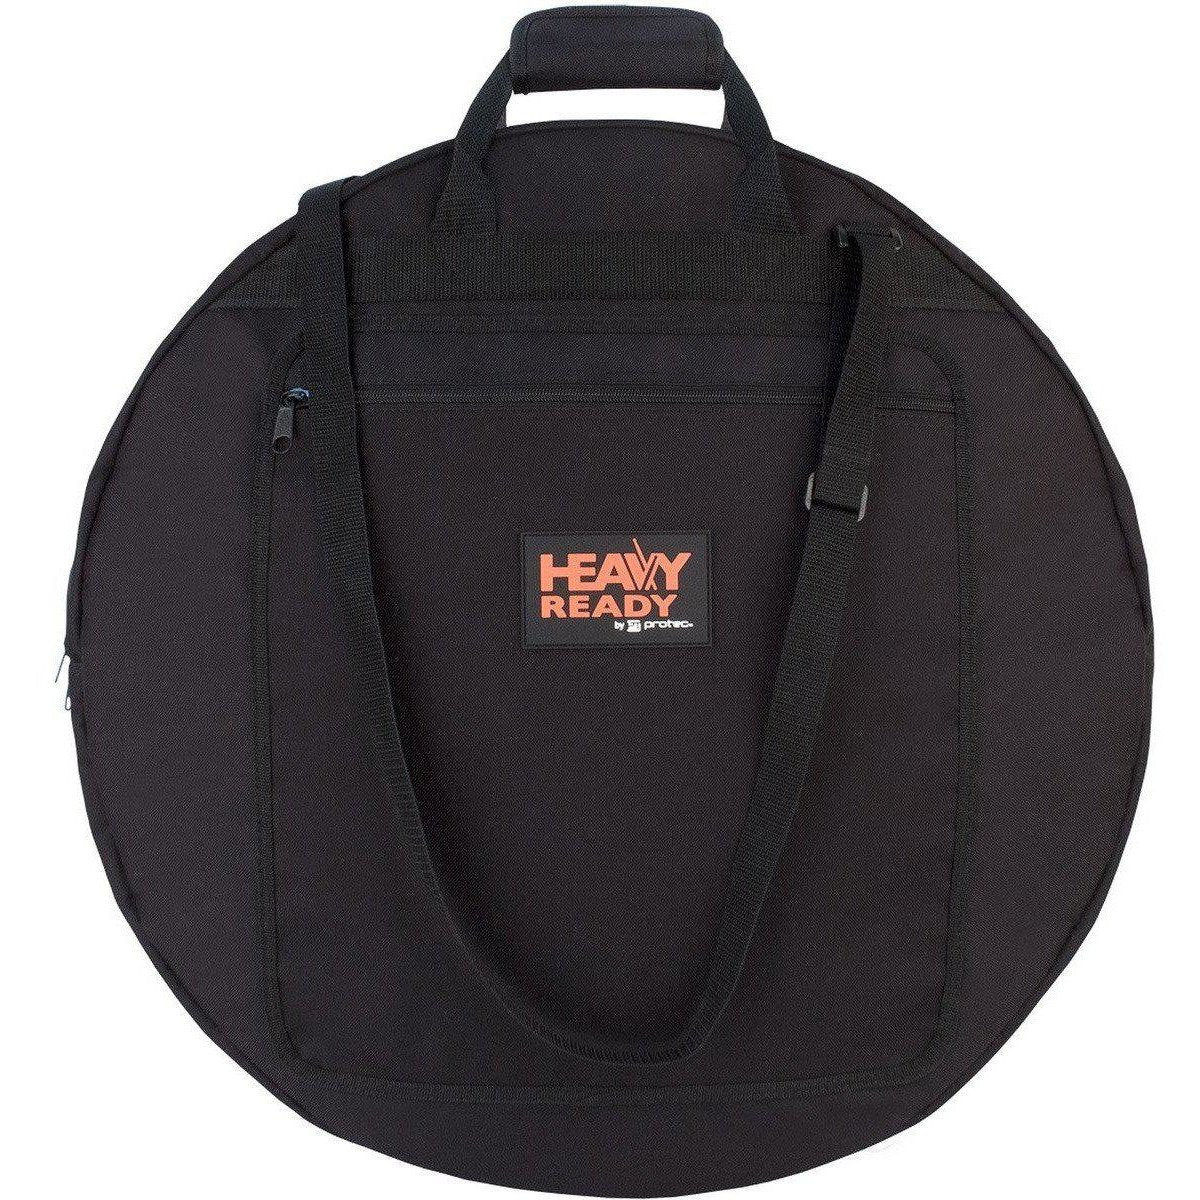 Protec 22" Cymbal Bag – Heavy Ready Series - HR230-Andy's Music